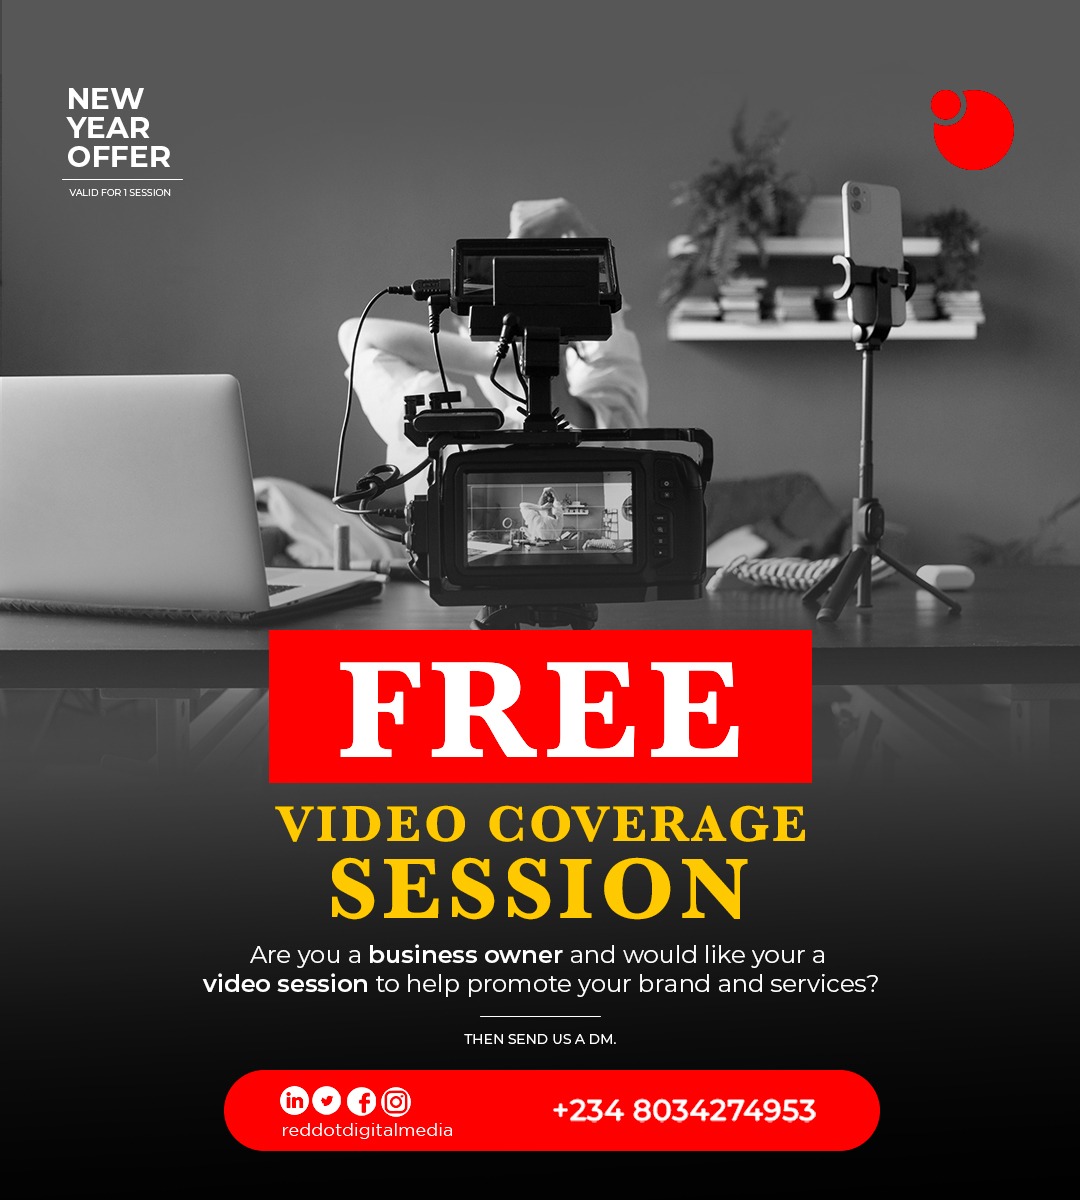 We are starting the NEW YEAR with a free offer. We want to help promote your brand with a FREE video session. How does that sound? Send a DM for more detail. #videoedit #videoshoot #productshoot #Advertising